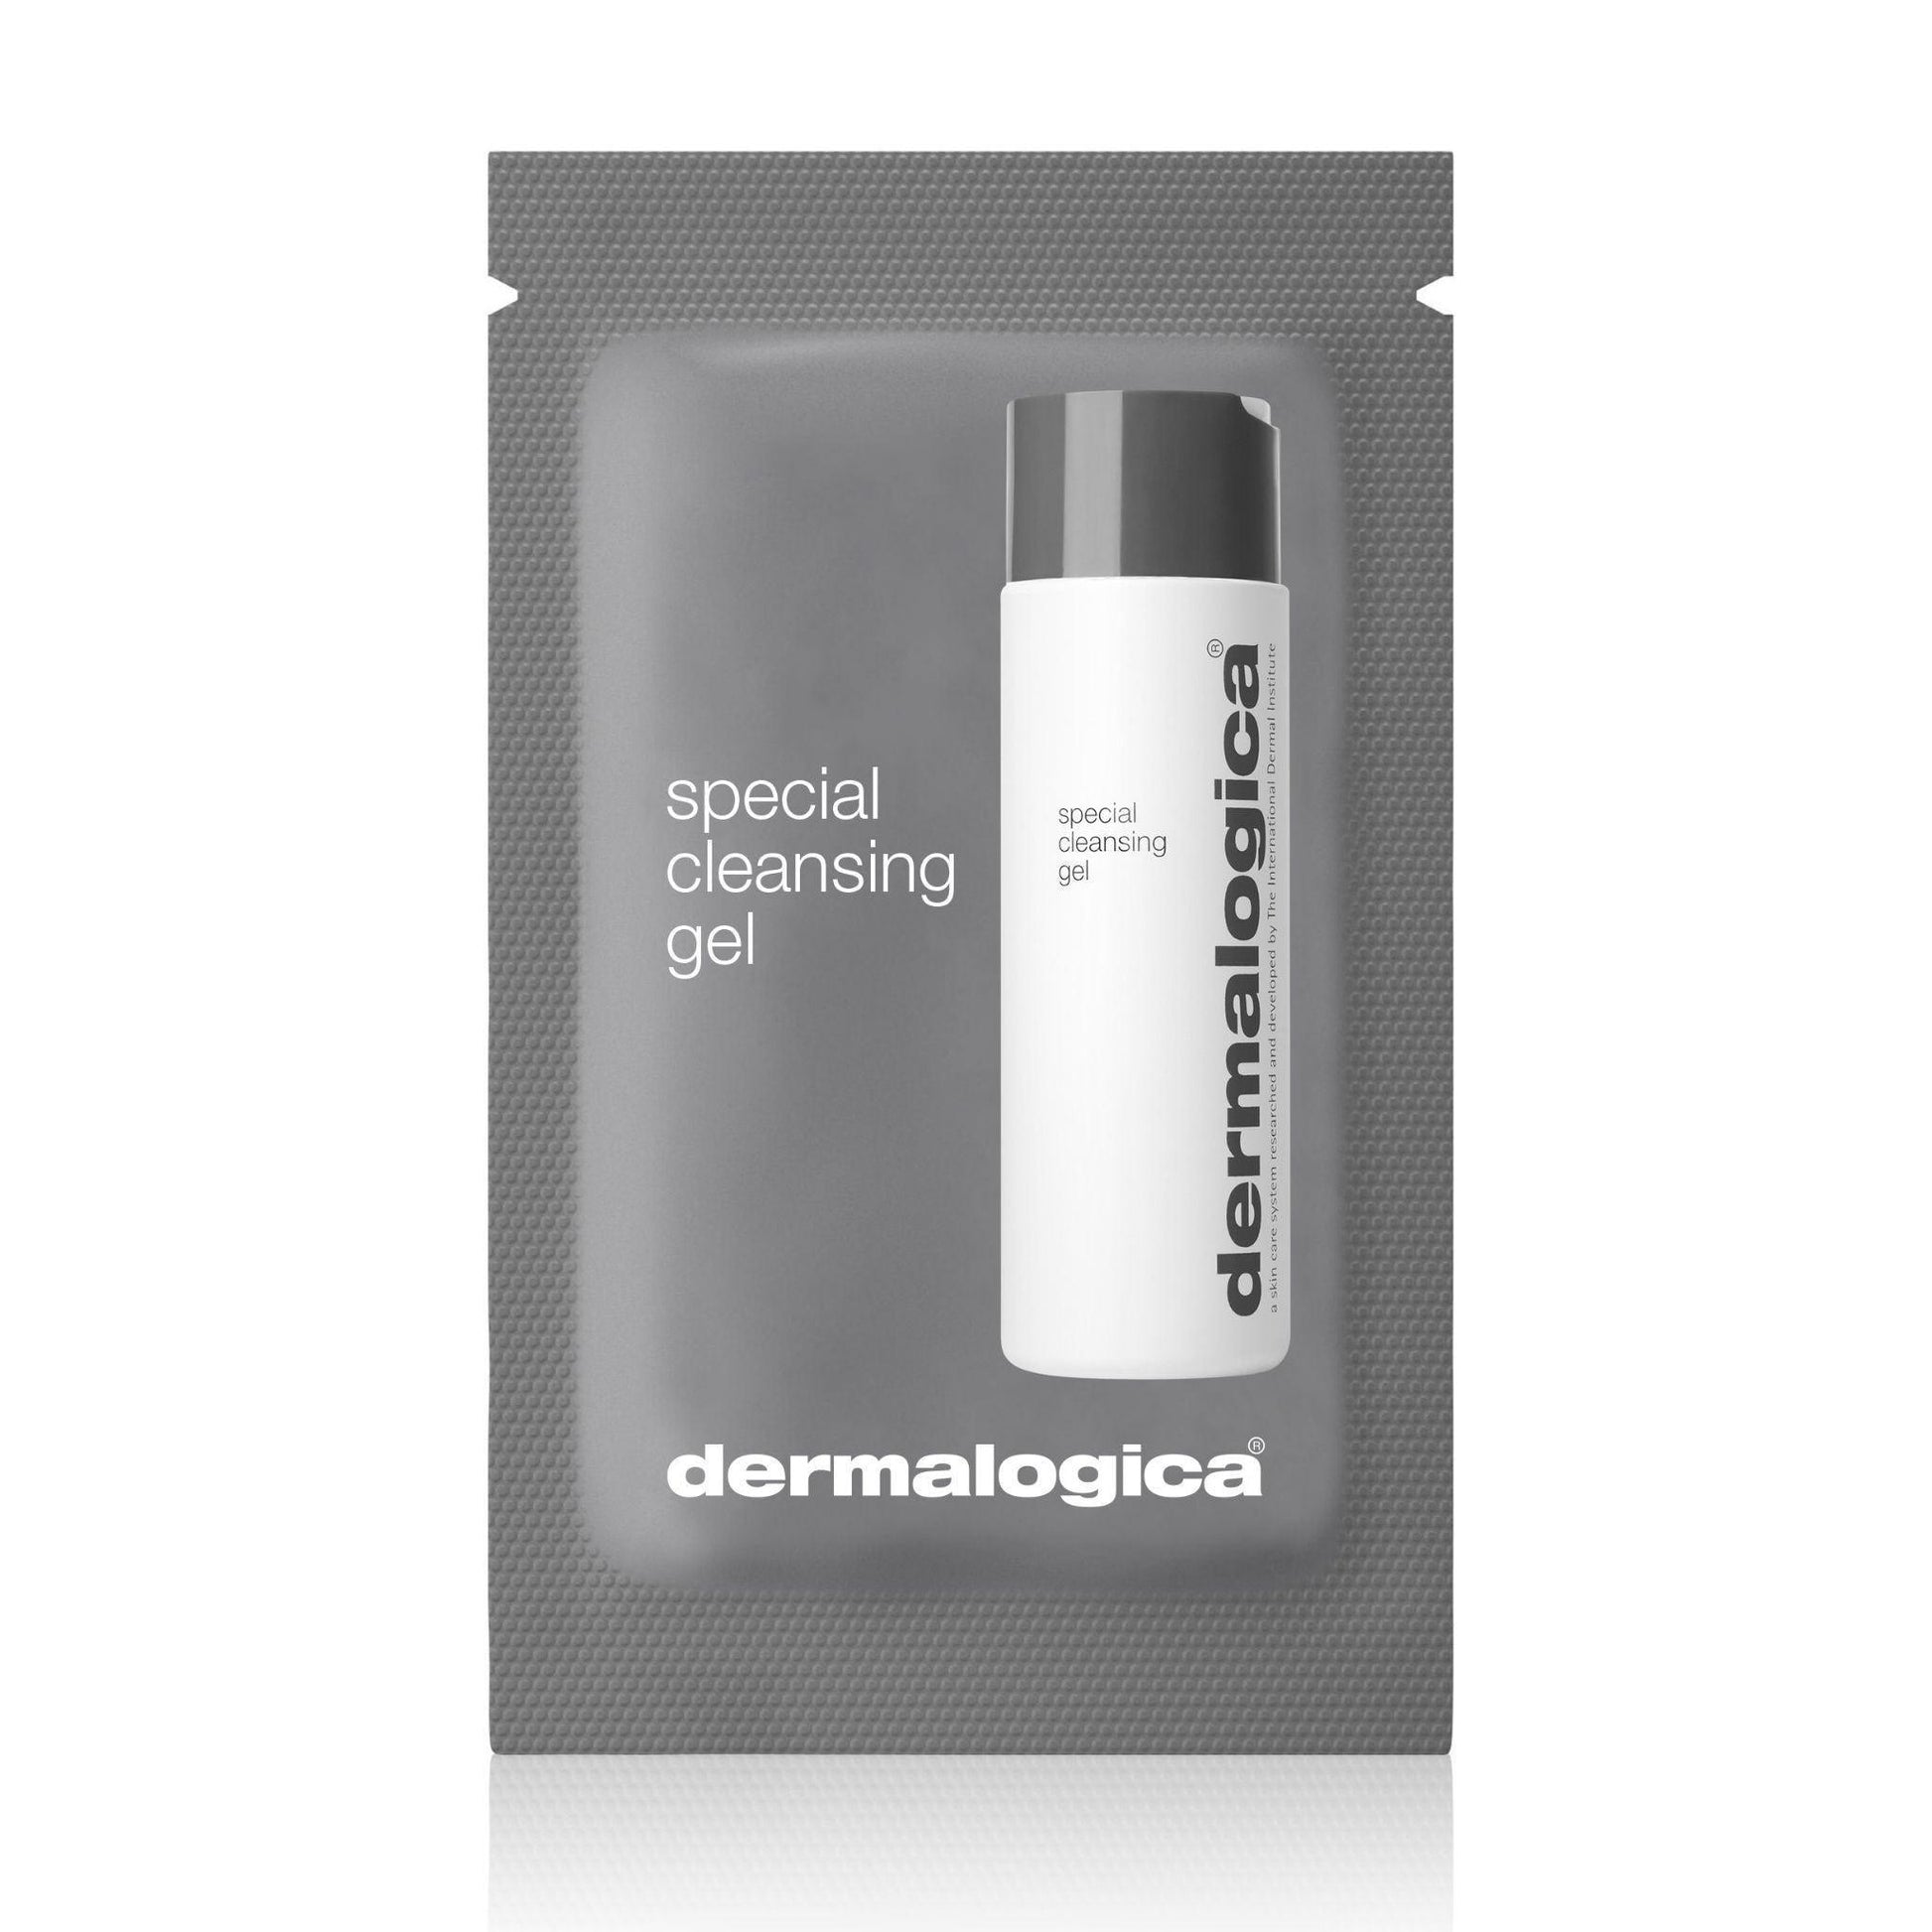 special cleansing gel sachet - Dermalogica Malaysia